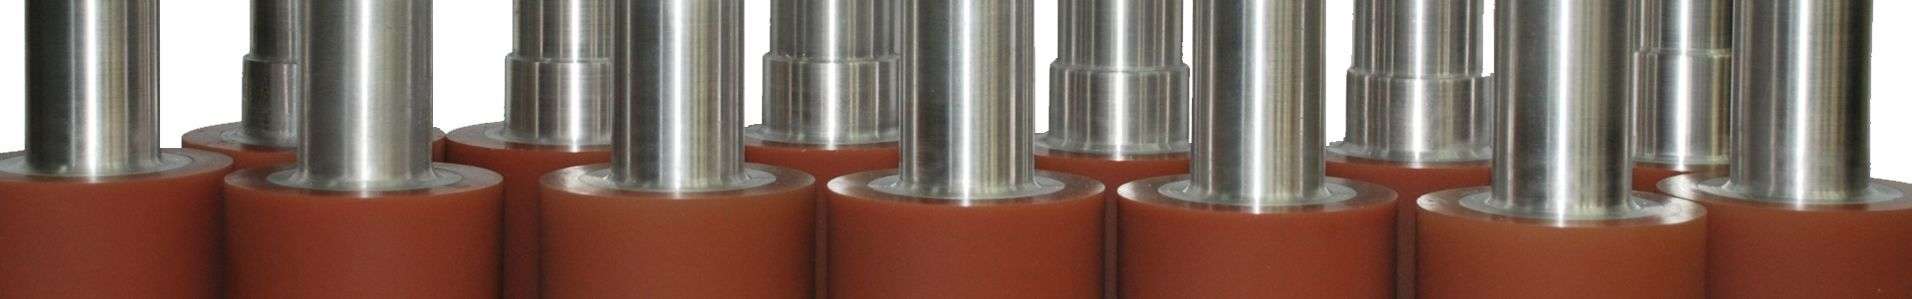 ROCAUCHO rubber rollers coatings